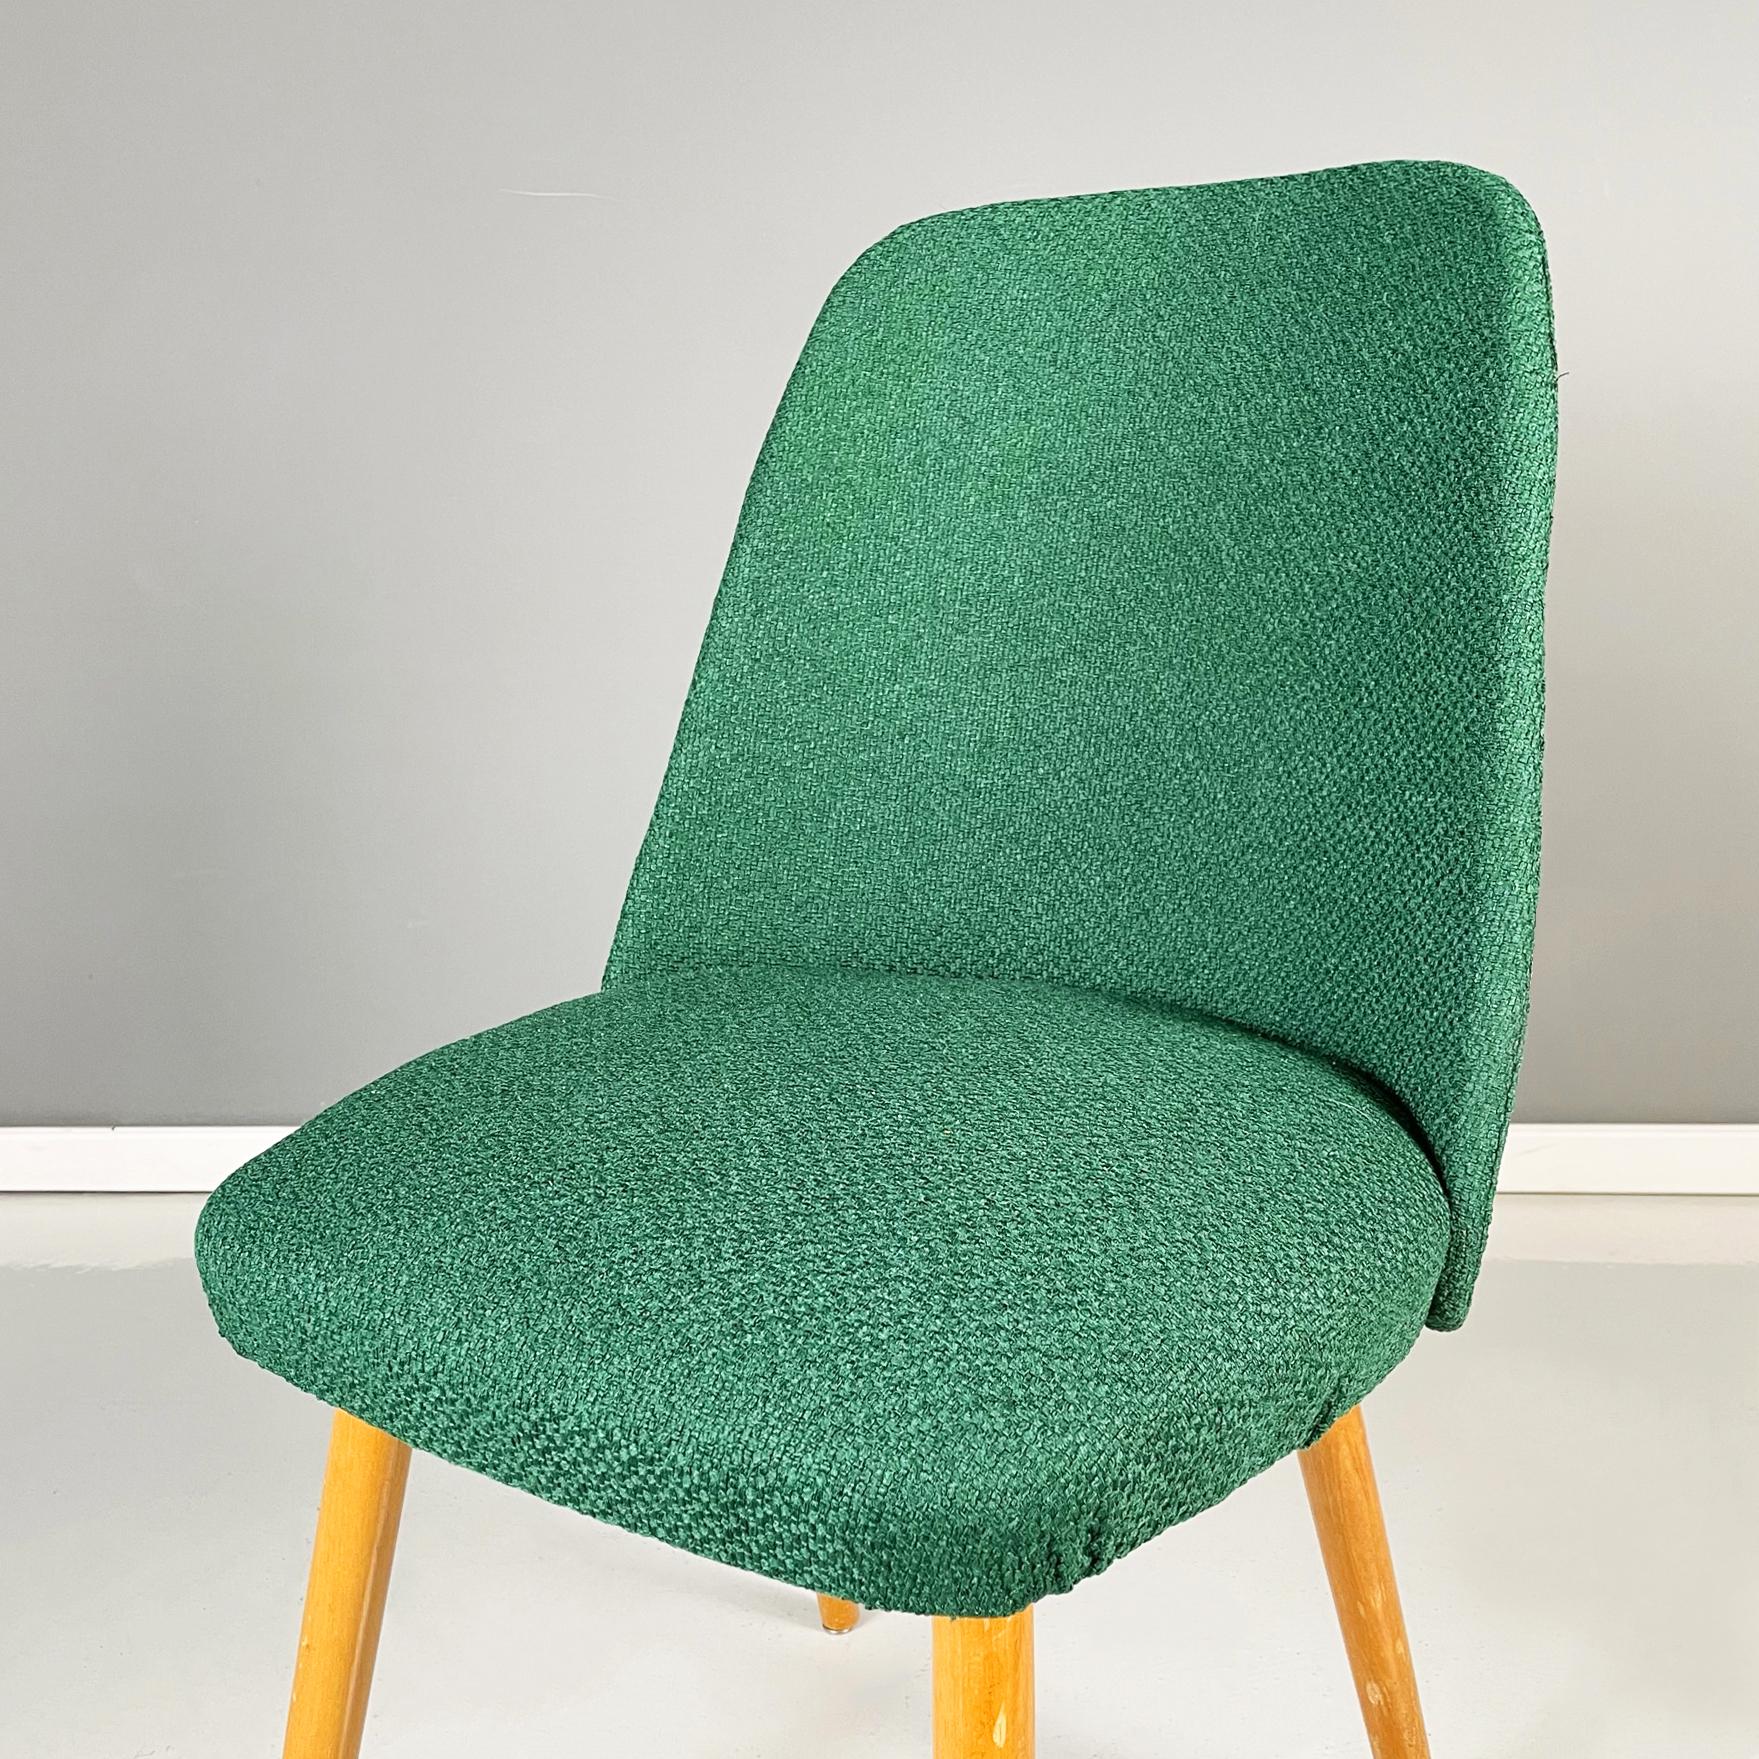 Italian Mid-Century Modern Chairs in Forest Green Fabric and Wood, 1960s For Sale 3